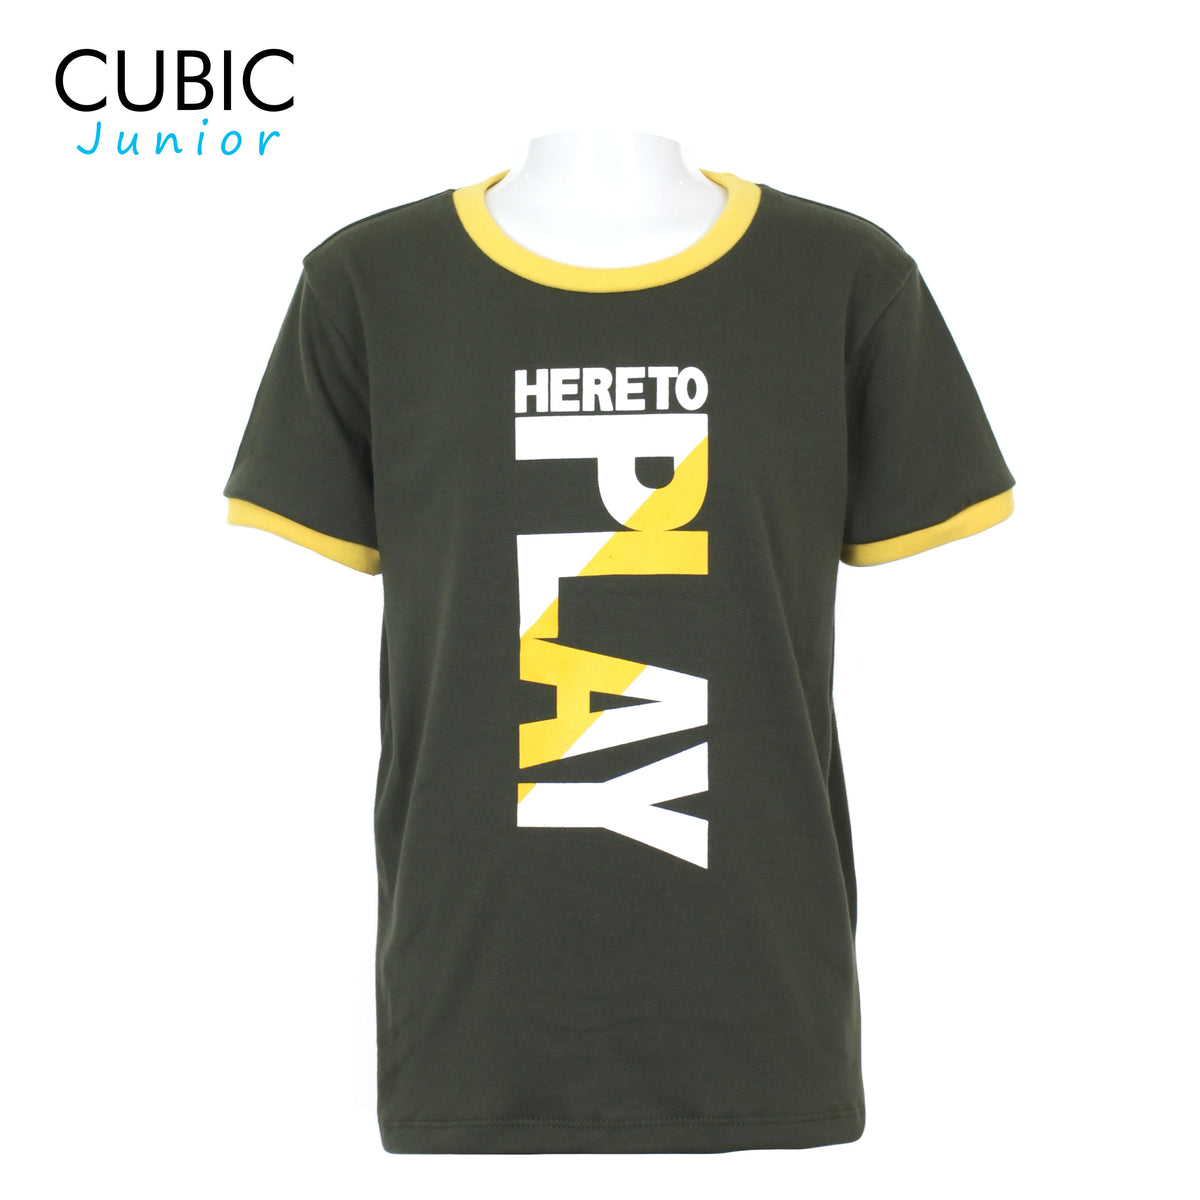 Cubic Boys Kids Round Neck Here to Play Graphic Print Design T-shirt Shirt Top for Boys - CKJ2304R